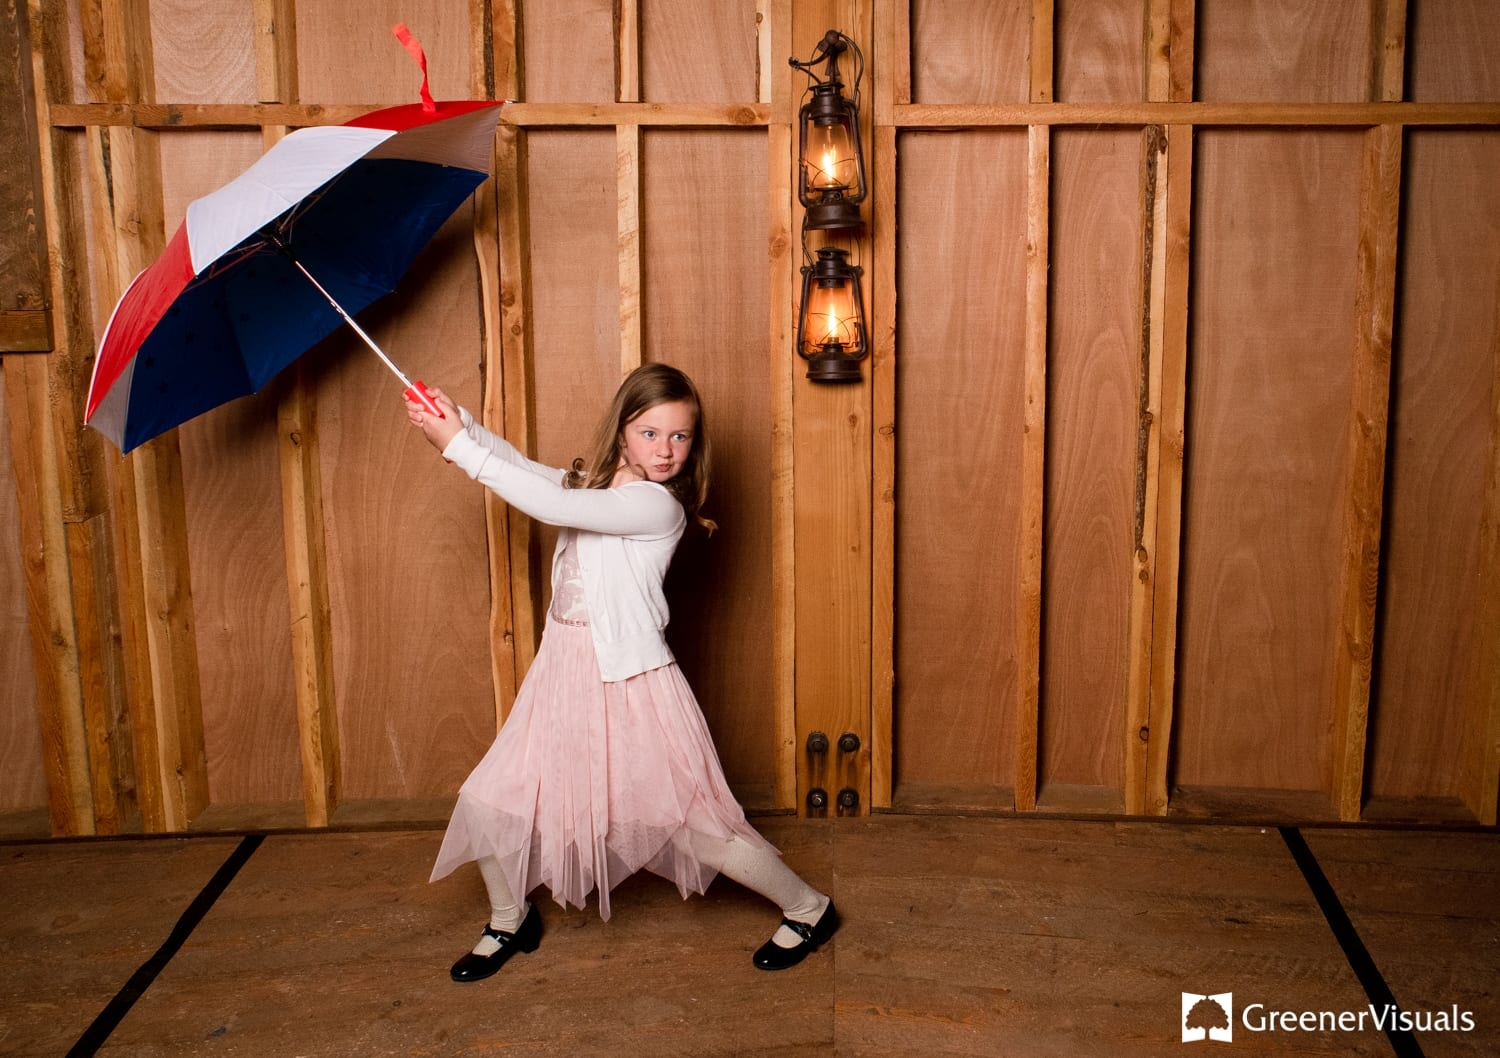 girl-with-umbrella-play-photo-booth-headwaters-ranch